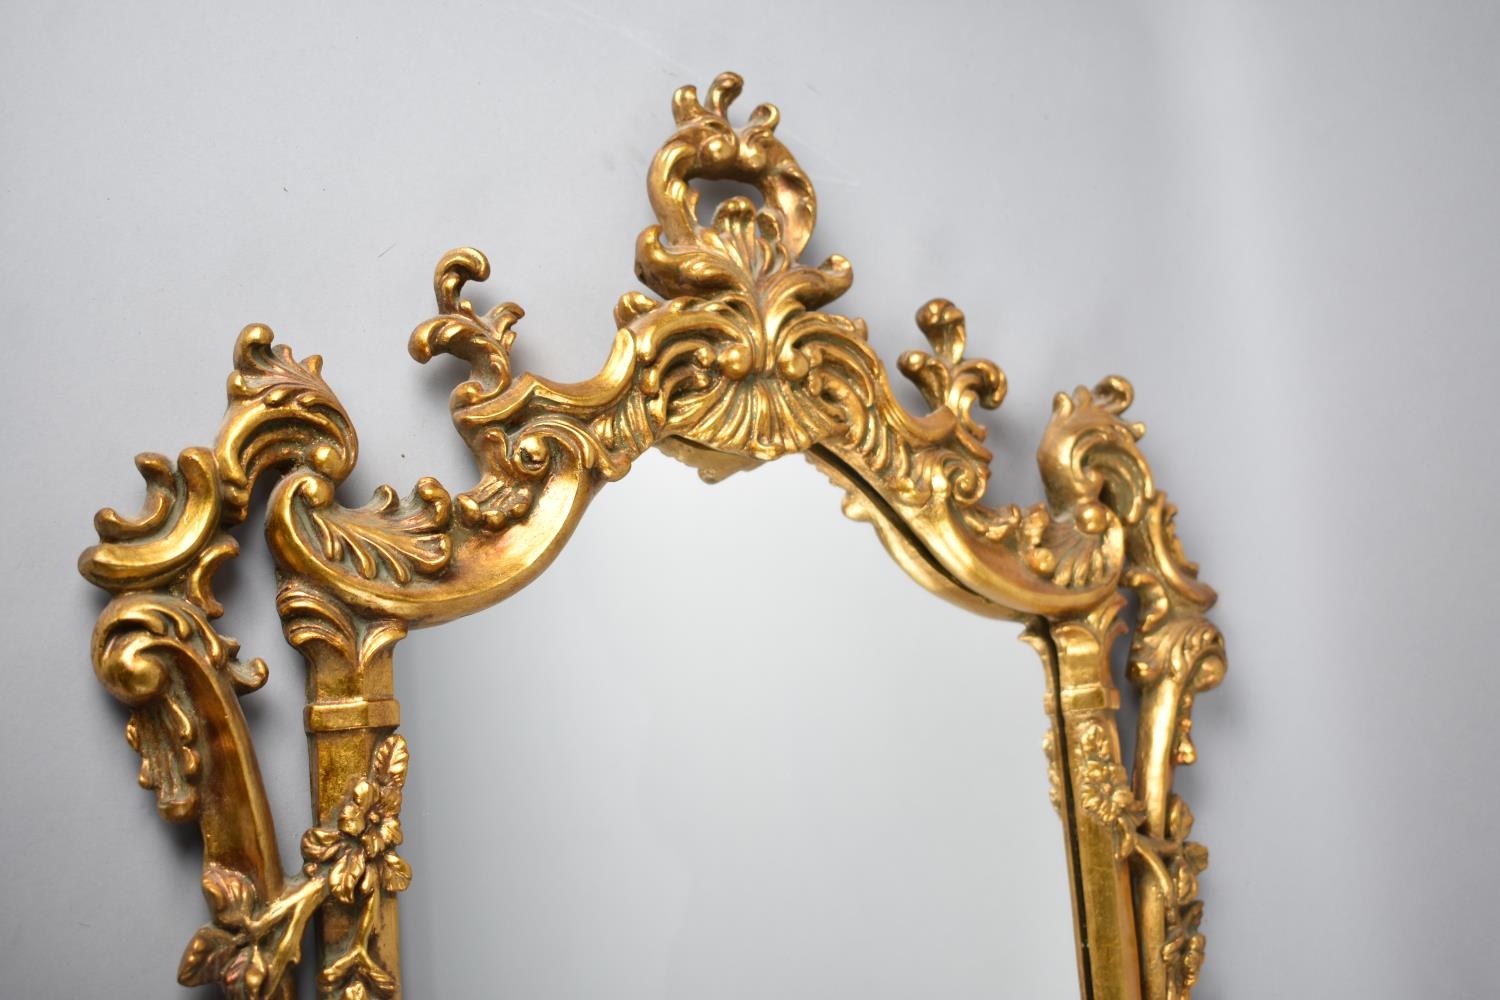 A Late 20th Century Gilt Framed Wall Mirror with Foliate Decoration, 77x49cms - Image 2 of 2